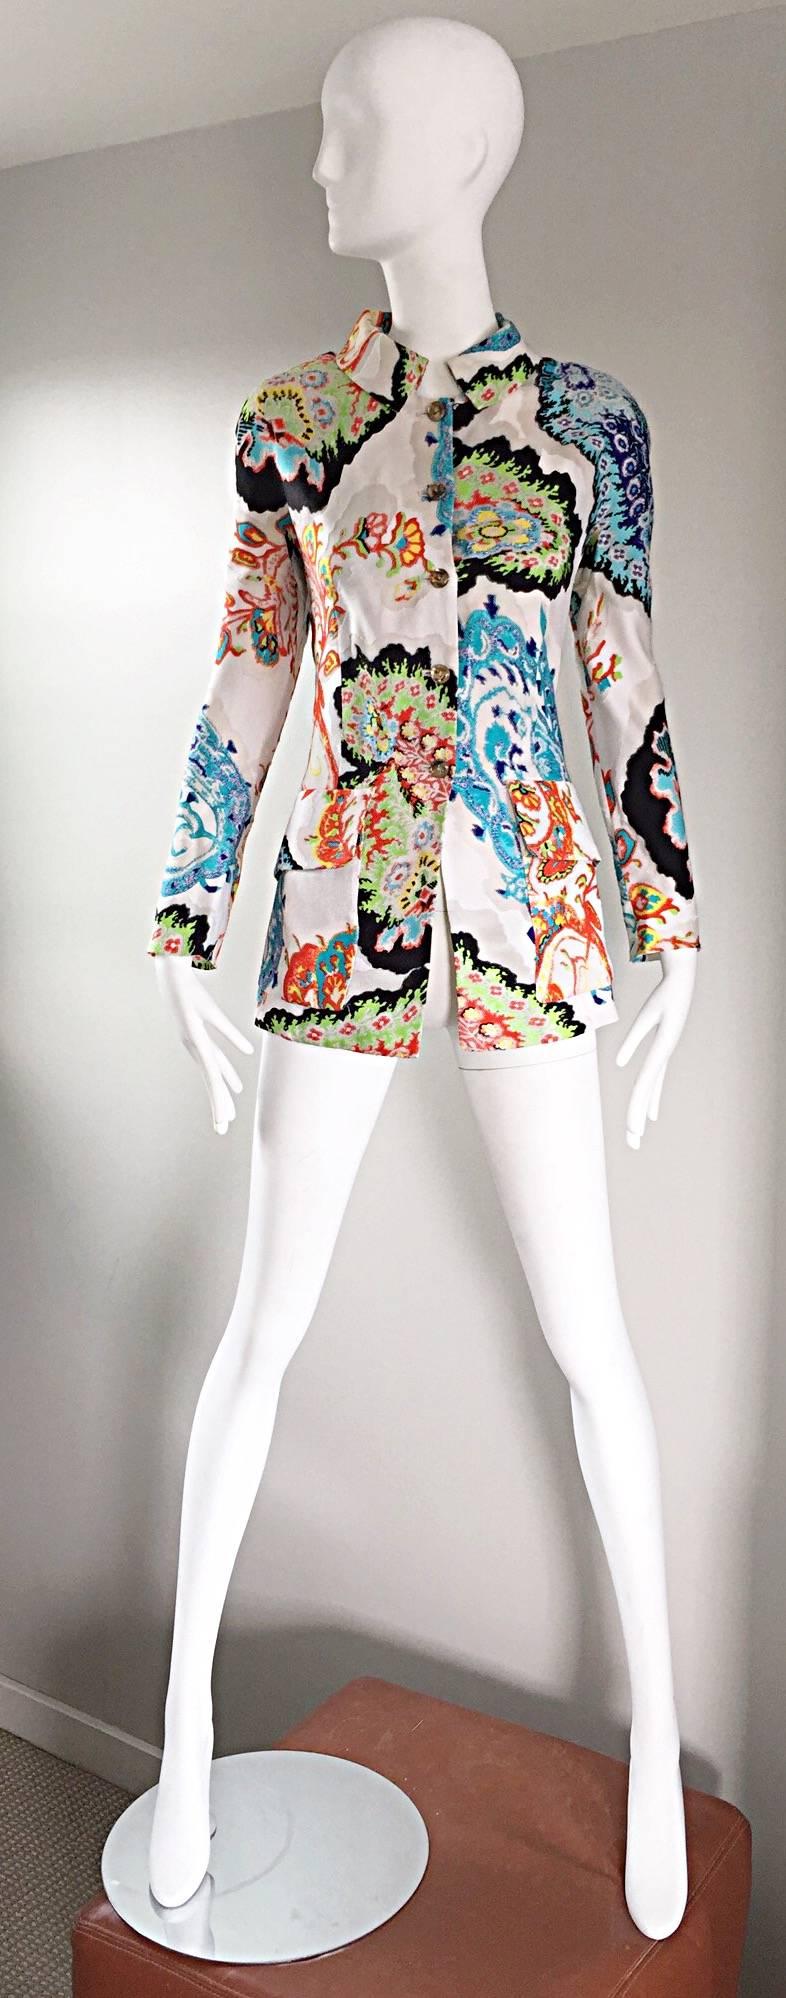 Incredible vintage CHRISTIAN LACROIX embroidered blazer jacket! Features vibrant colorful hand embroidery work throughout. Ivory background, with blue, orange, green, yellow, and black embroidery. Two pockets at both sides of the waist. Horn colored